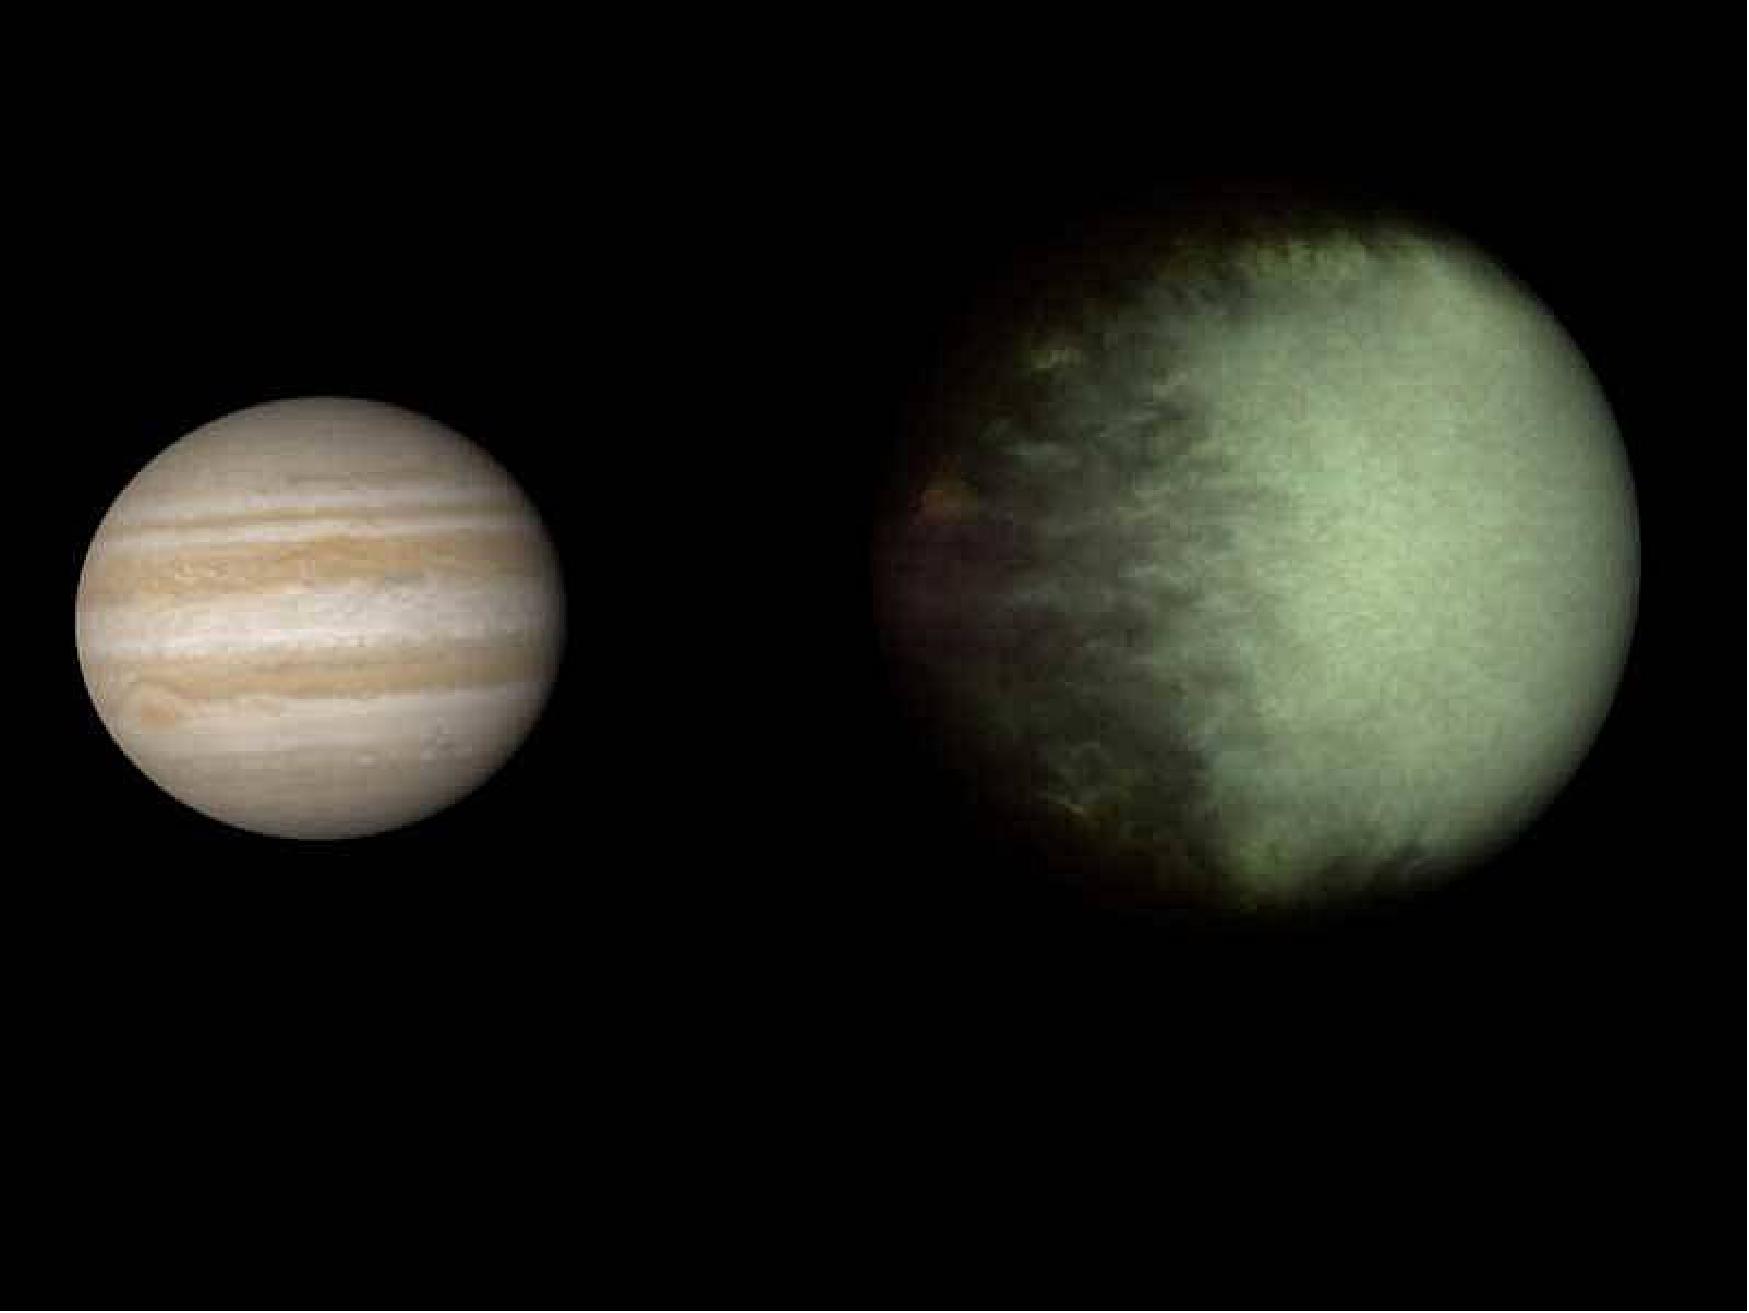 Figure 22: Kepler-7b (right), which is 1.5 times the radius of Jupiter (left), is the first exoplanet to have its clouds mapped. The cloud map was produced using data from NASA's Kepler and Spitzer space telescopes (image credit: NASA/JPL)